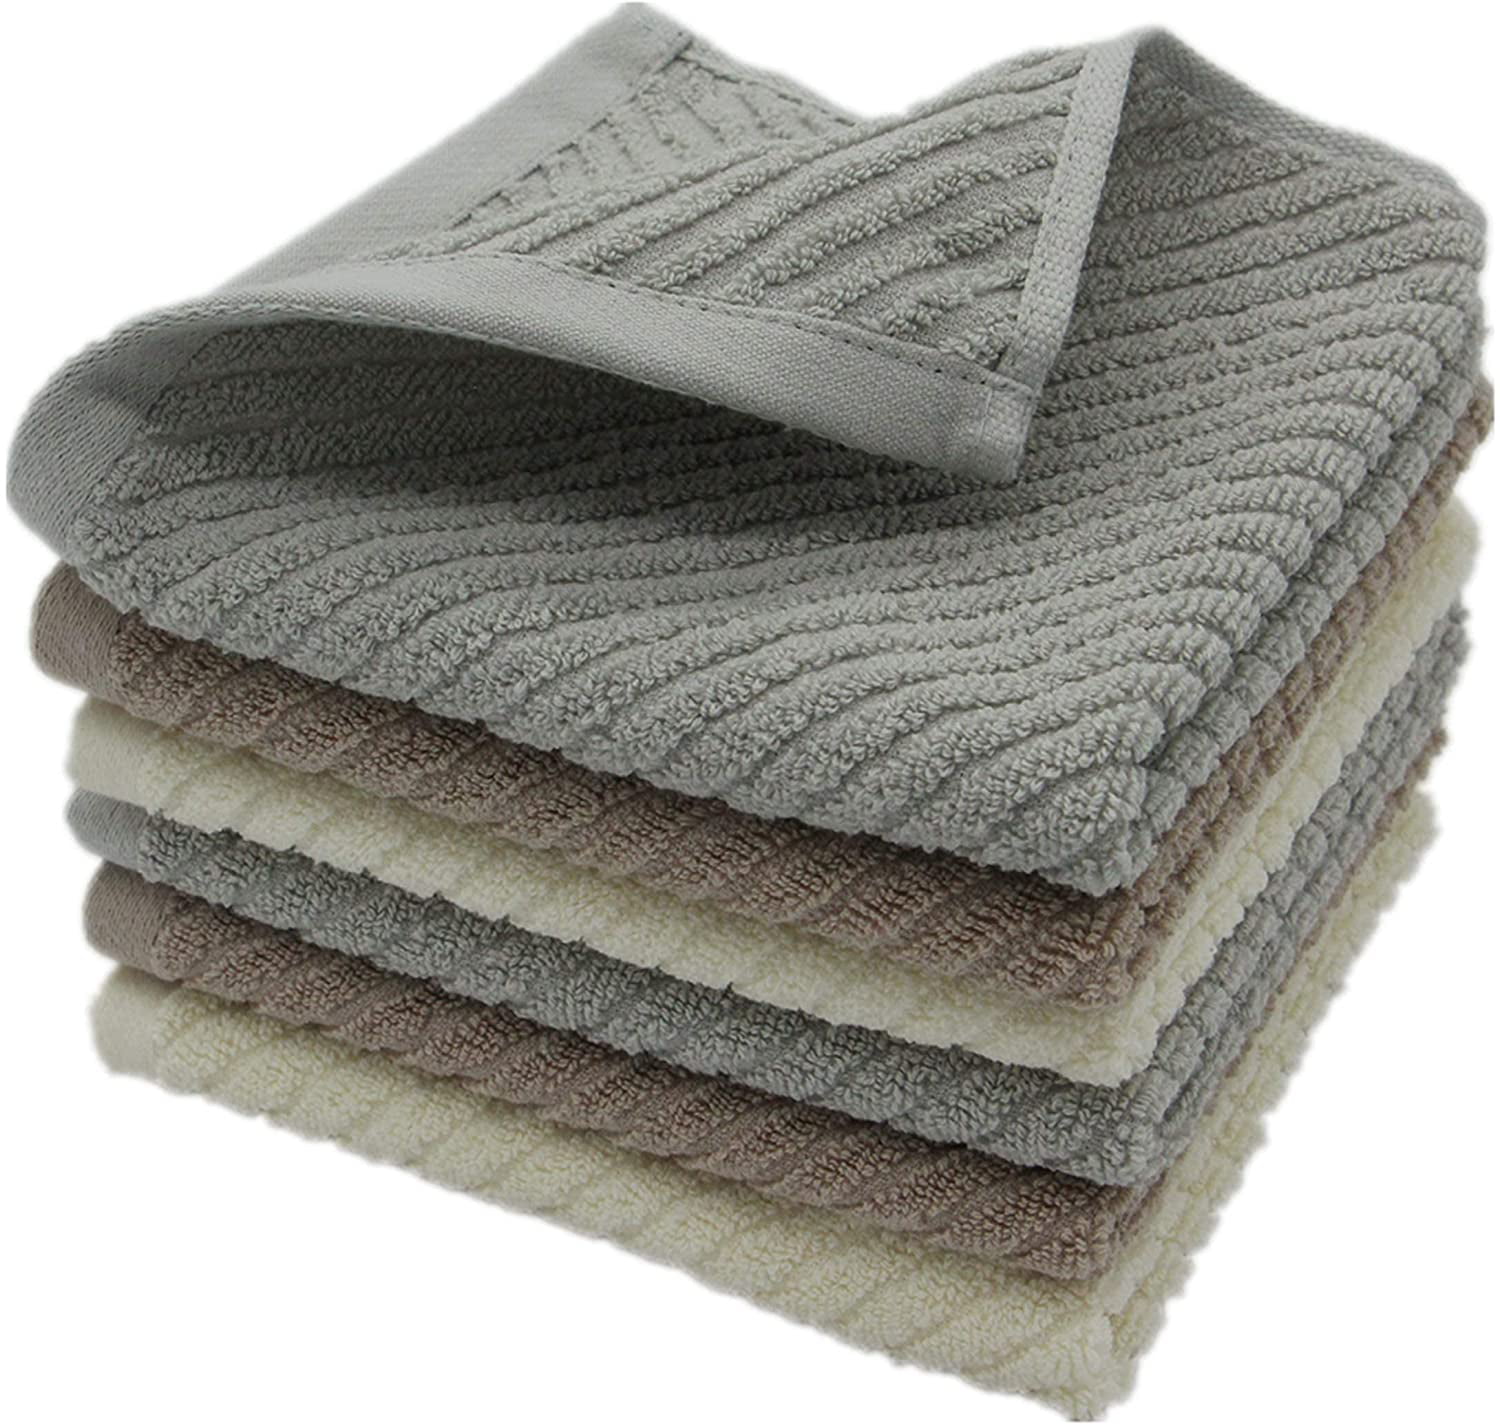 10 Pack Dish Cloths Coral Fleece Quick Drying Kitchen Towels Non Stick Oil Dish Rags Easy Clean Super Absorbent Water Clean Rags for Kitchen Office Car Cleaning 11.8x10.2 in 